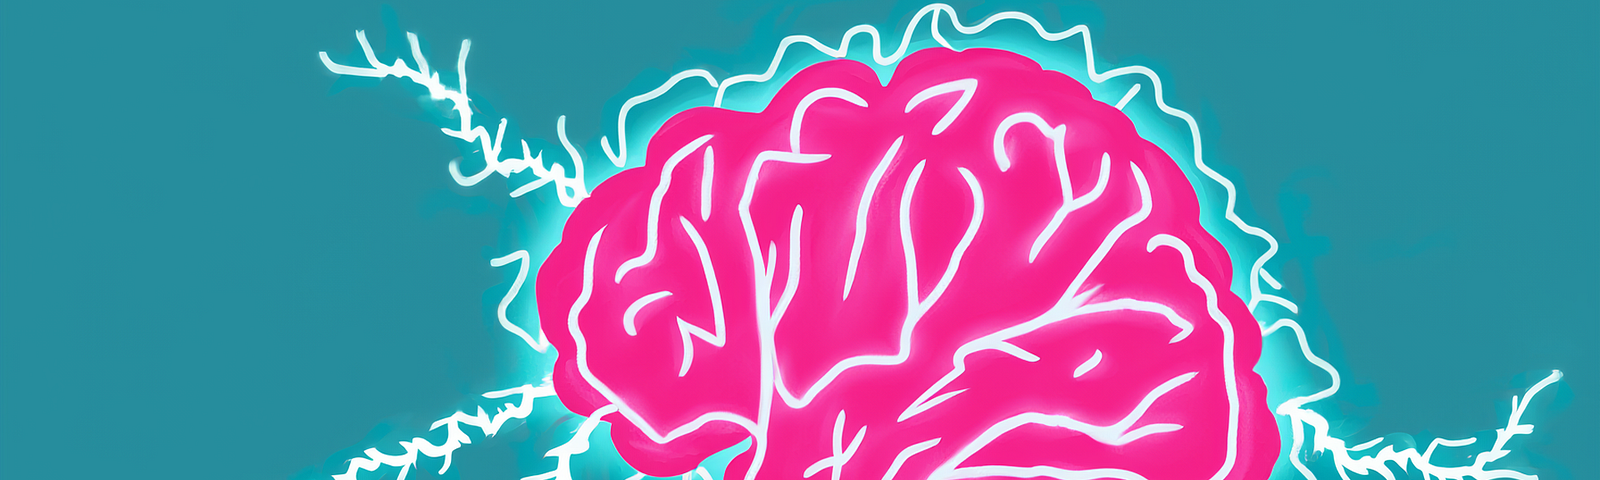 Illustration of a pink brain with electricity shooting out of it on a teal background.